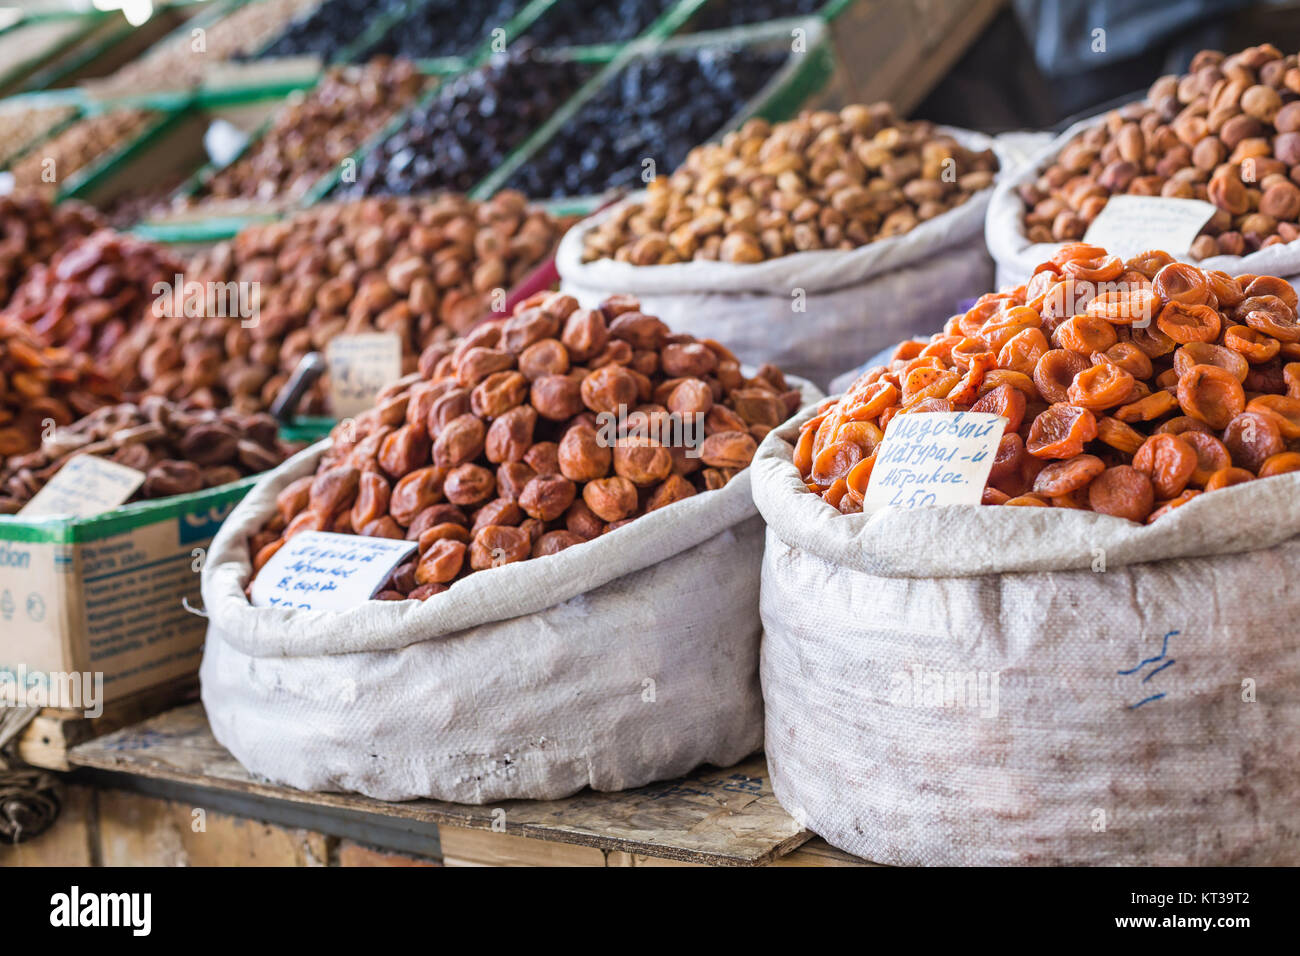 Dry fruits and spices like cashews, raisins, cloves, anise, etc. on display for sale in a Osh bazaar in Bishkek Kyrgyzstan. Stock Photo